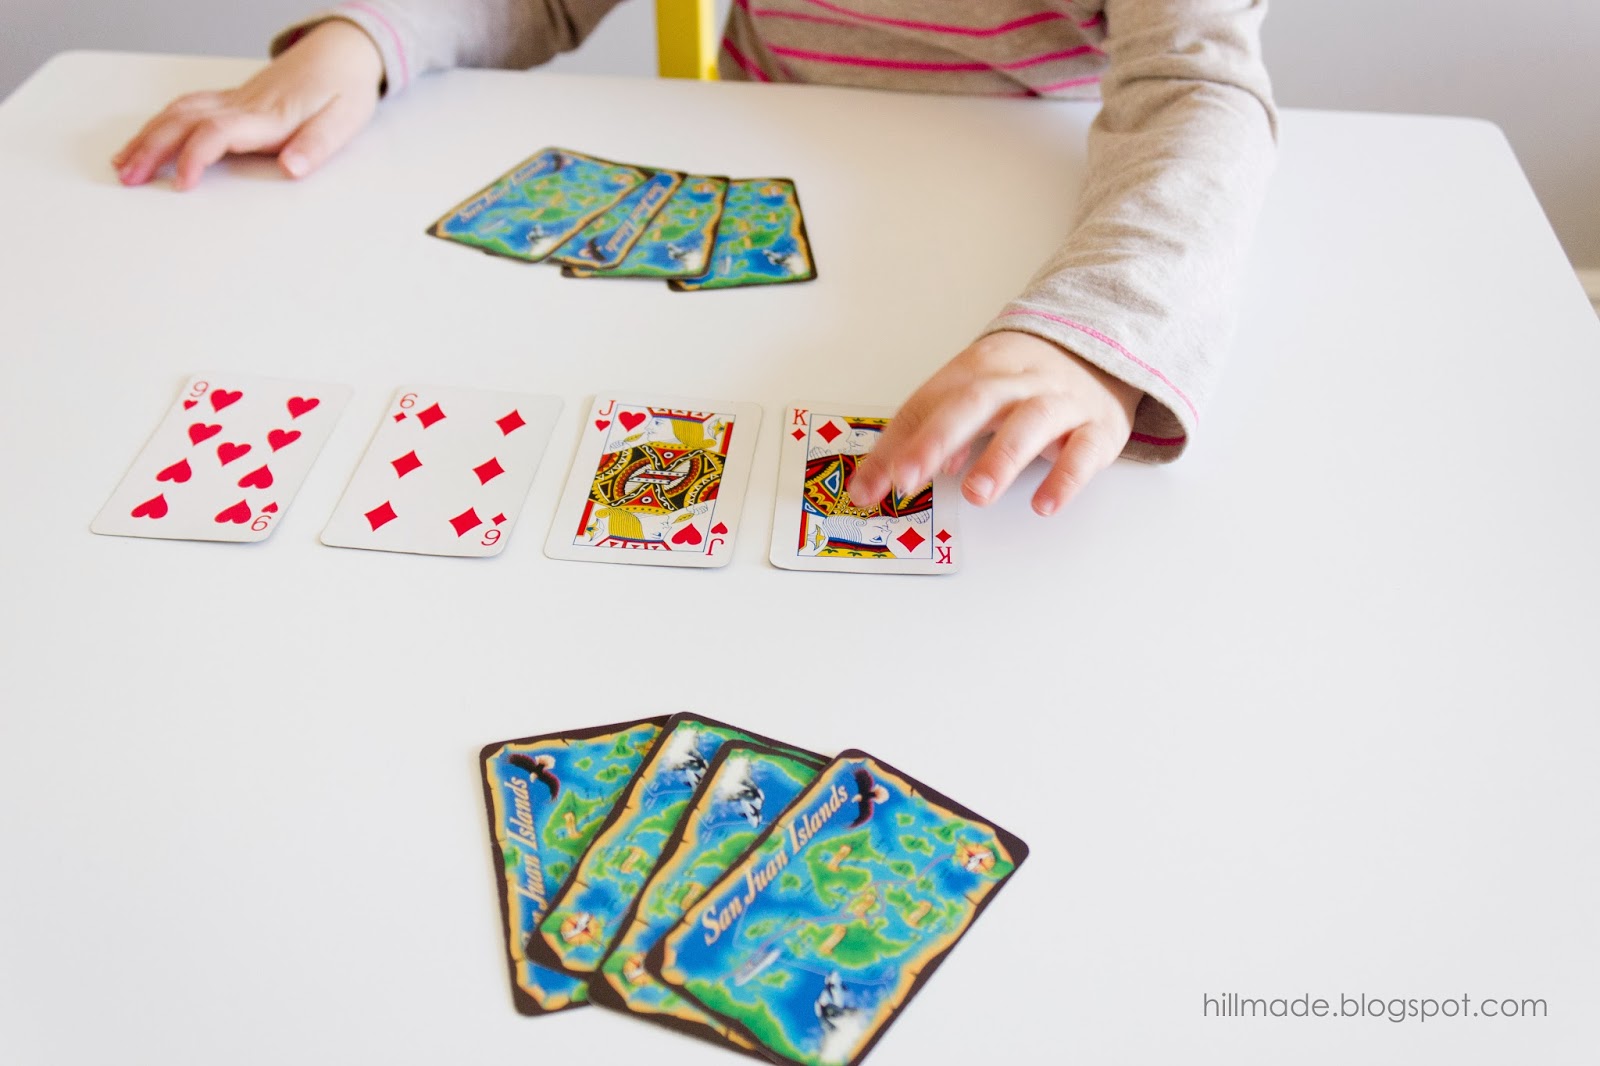 hillmade: Kids  A Fun and Simple Matching Game: Steal the Pile